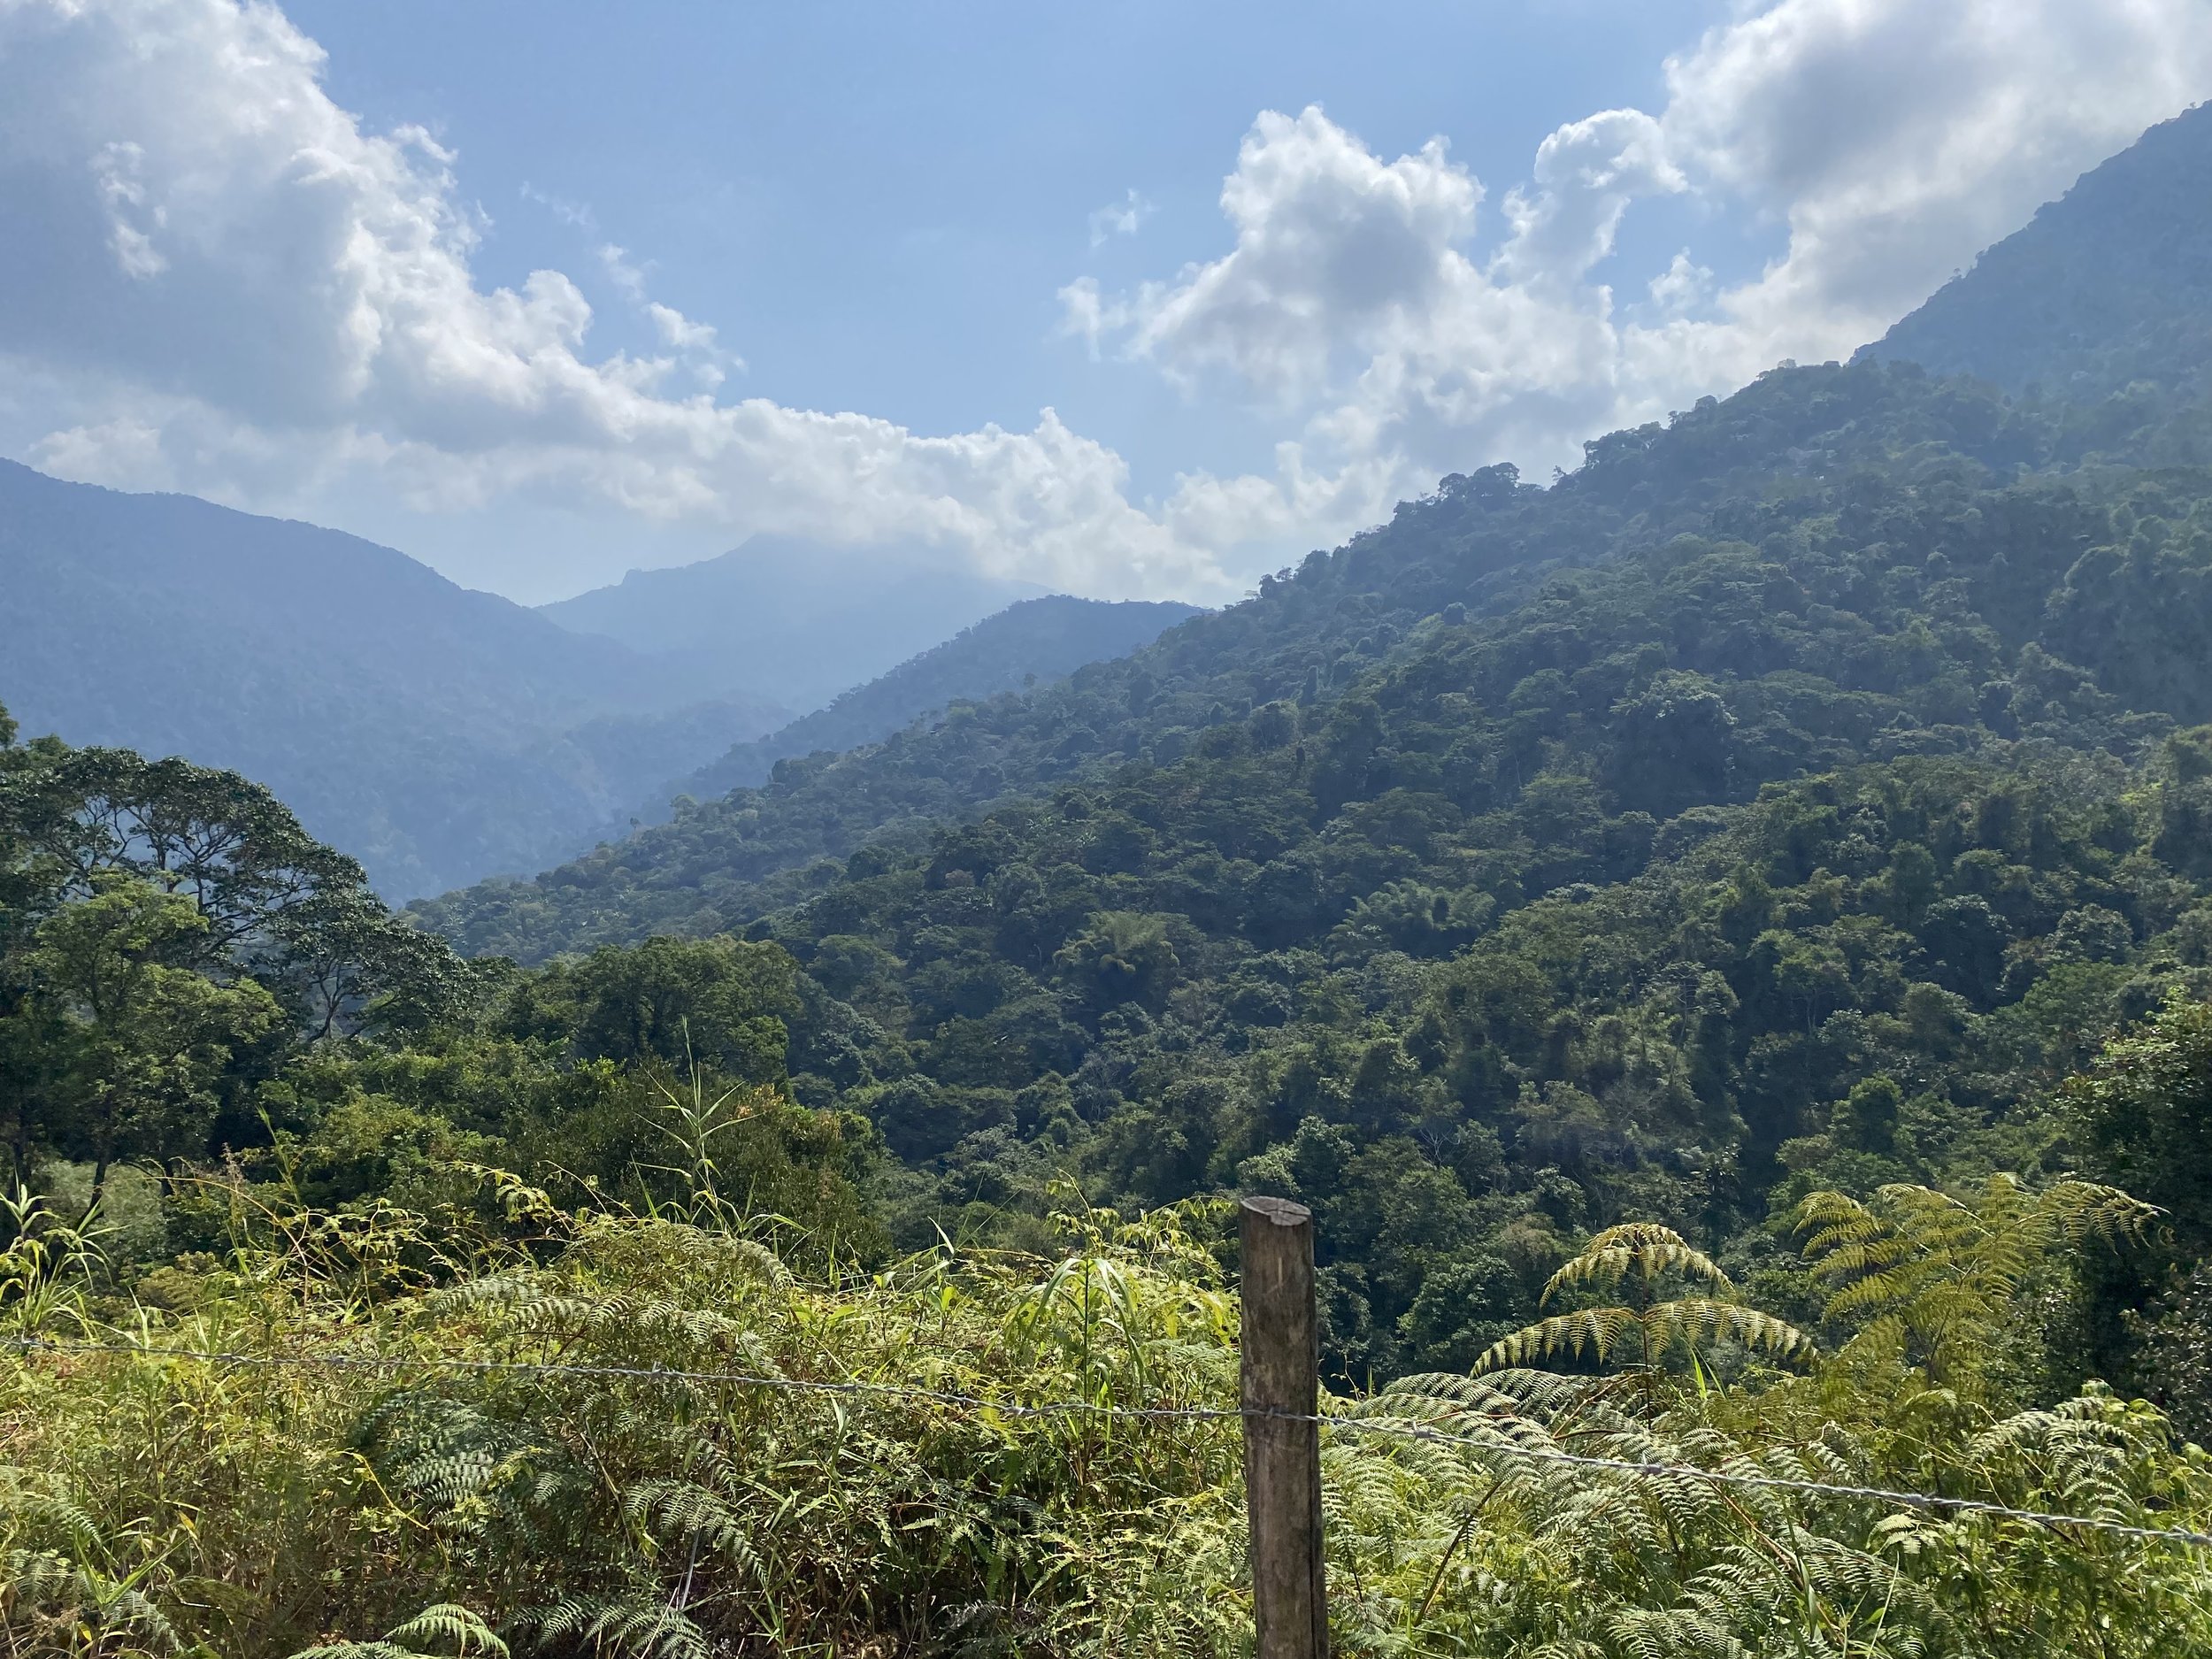  A post on a wire fence overlooking lush jungle mountains and valleys 